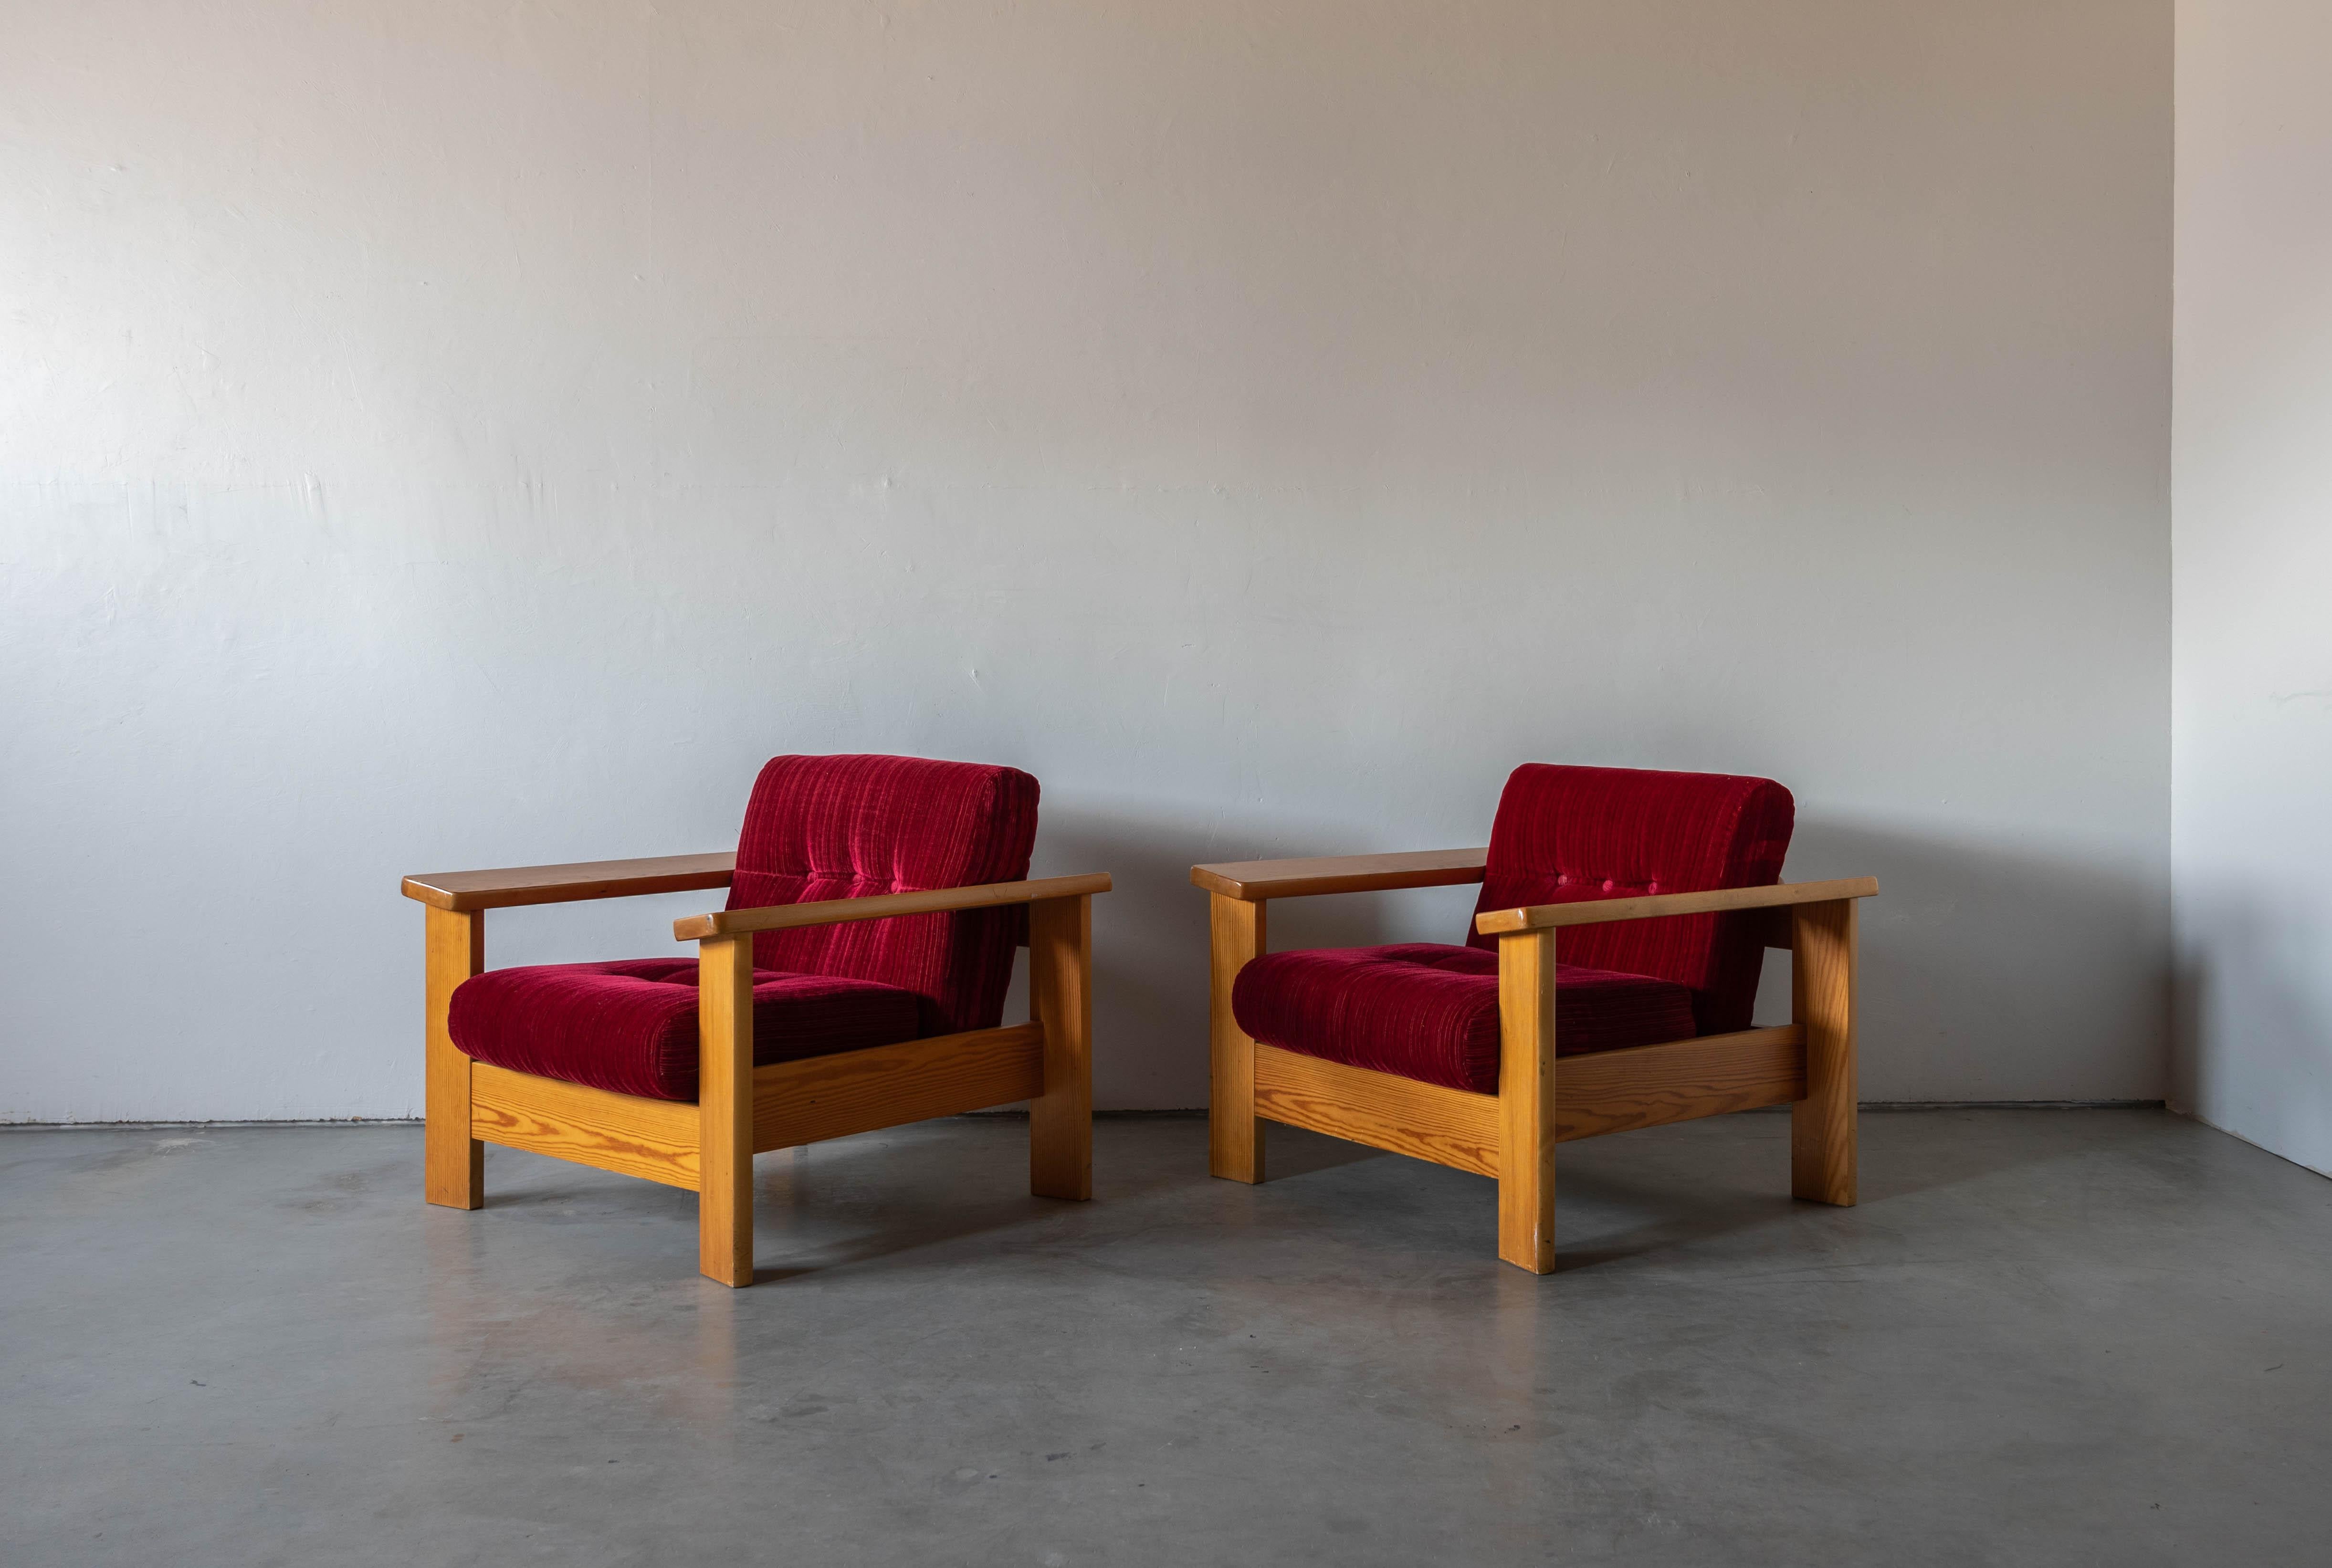 A pair of lounge chairs. Designed and produced in Sweden, 1970s. Cushion upholstered in fabric and fitted with buttons.

